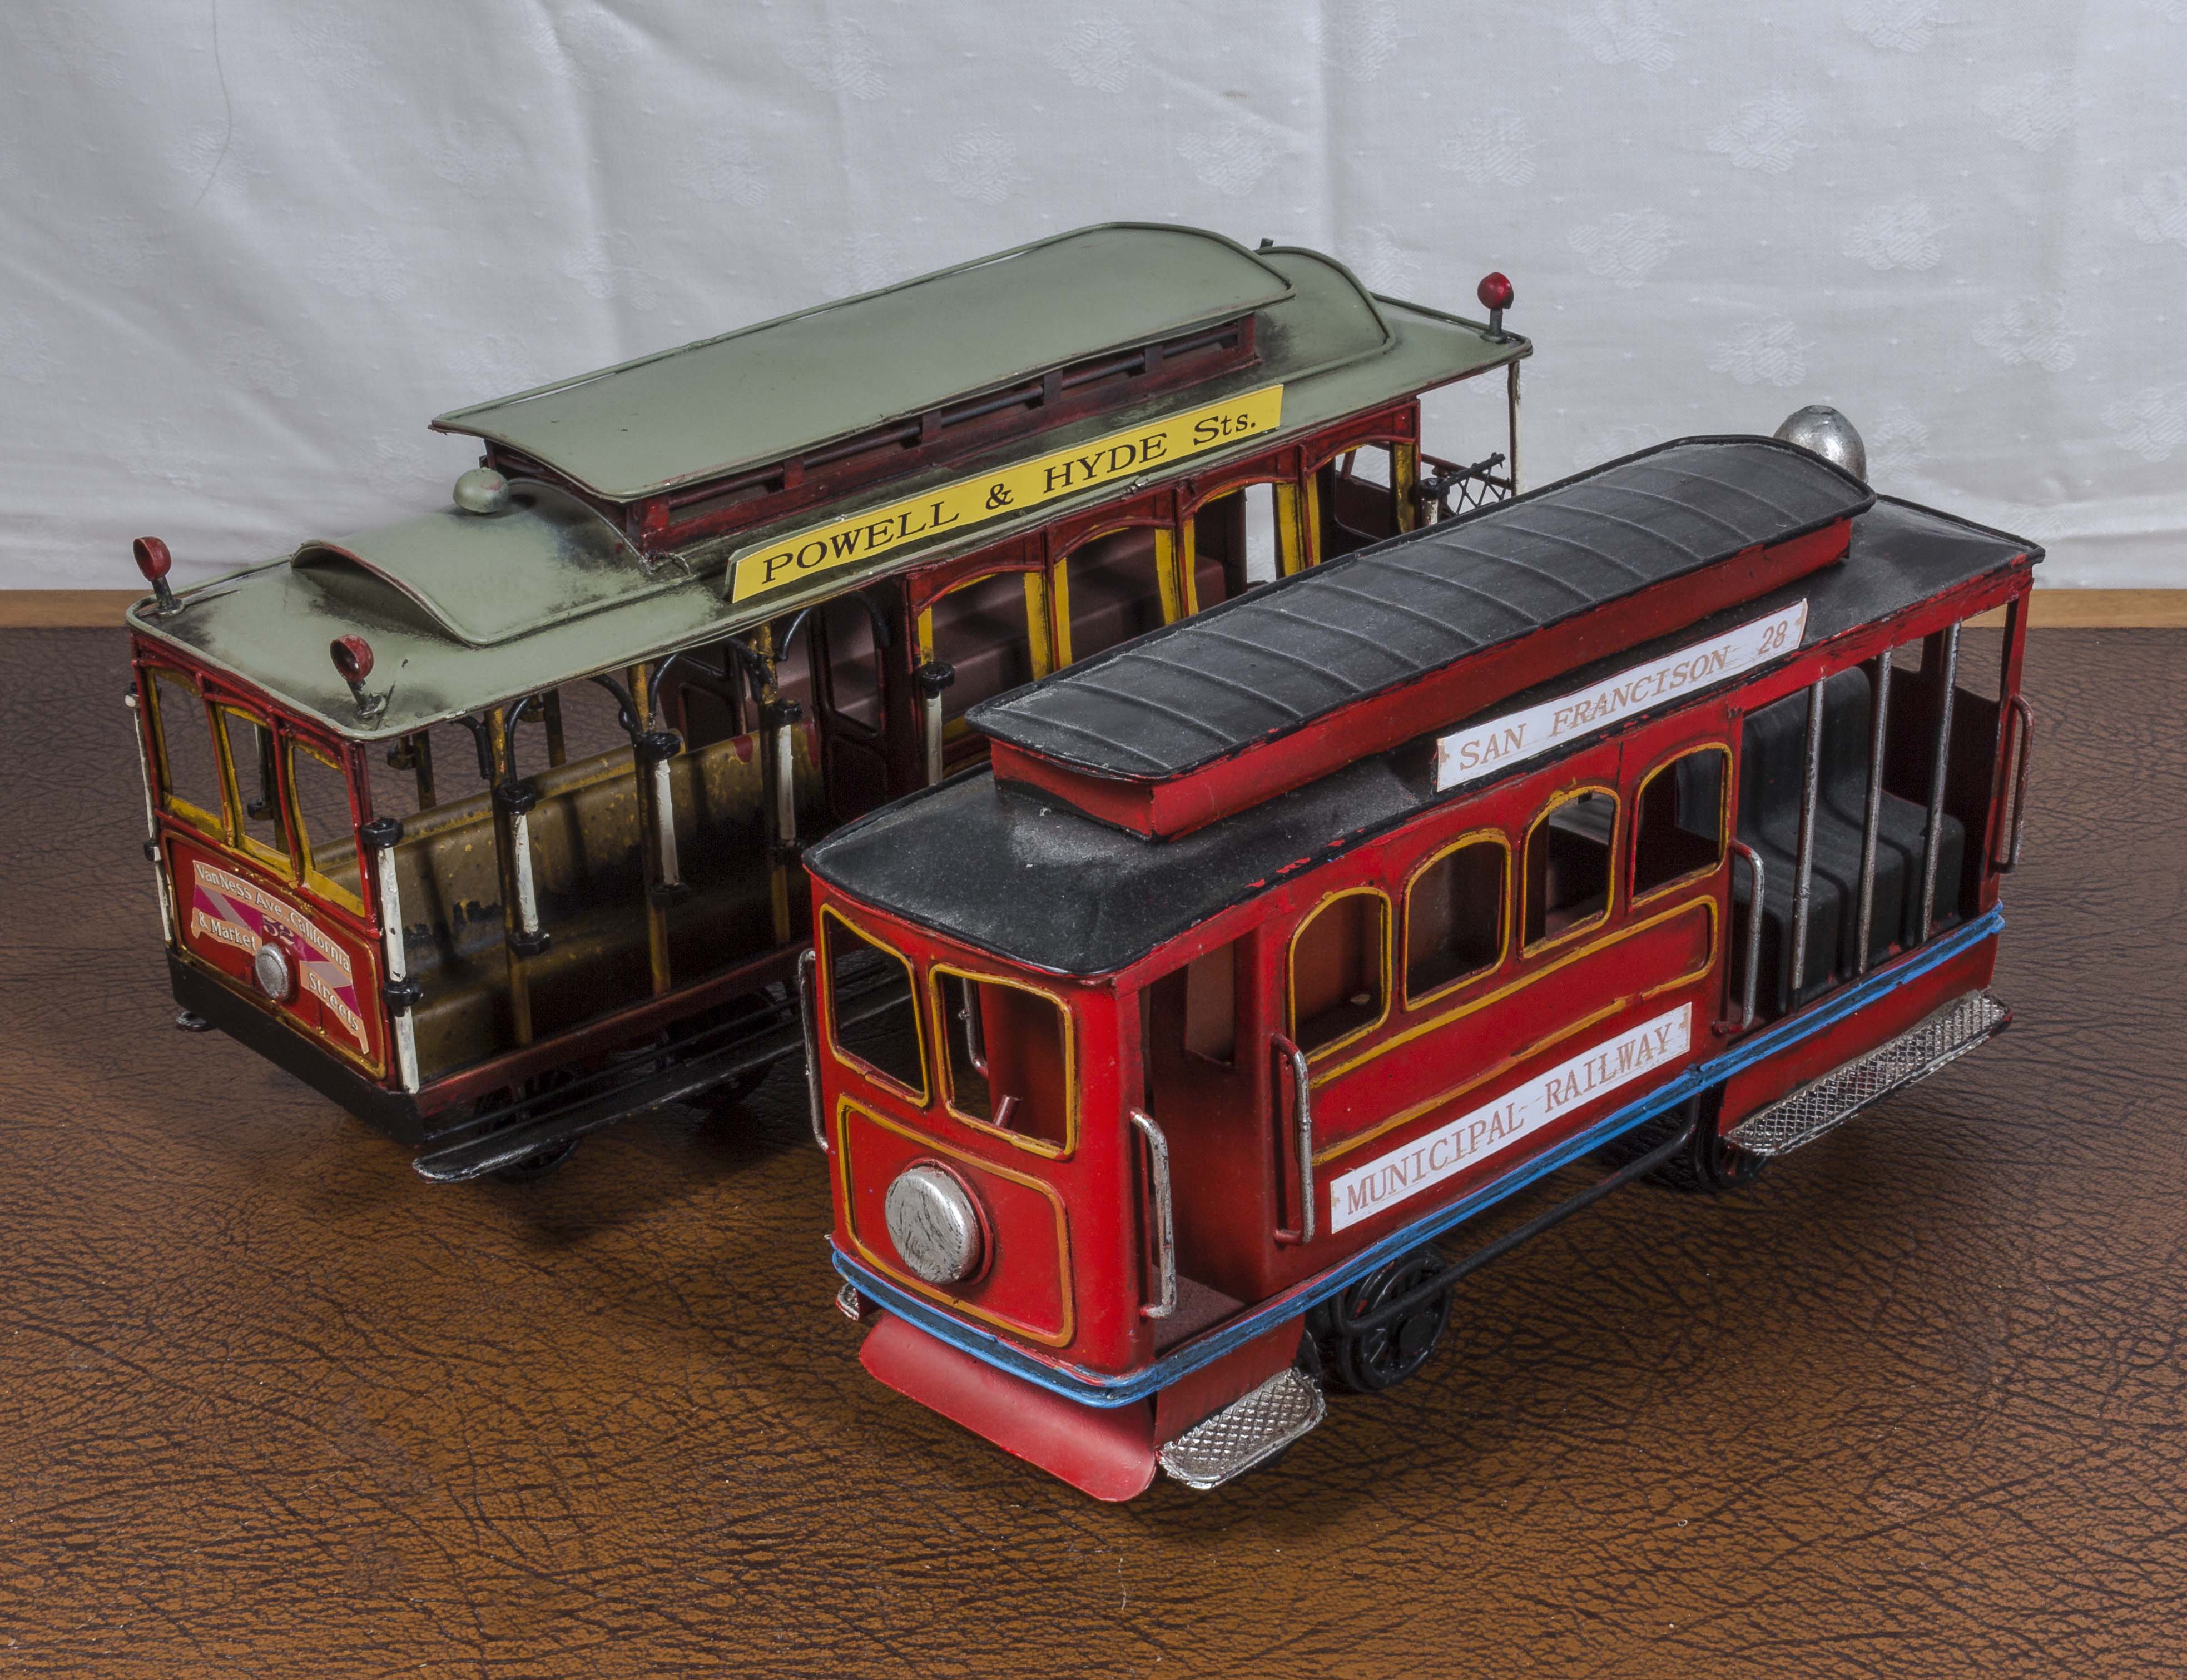 Two trolley bus carriages